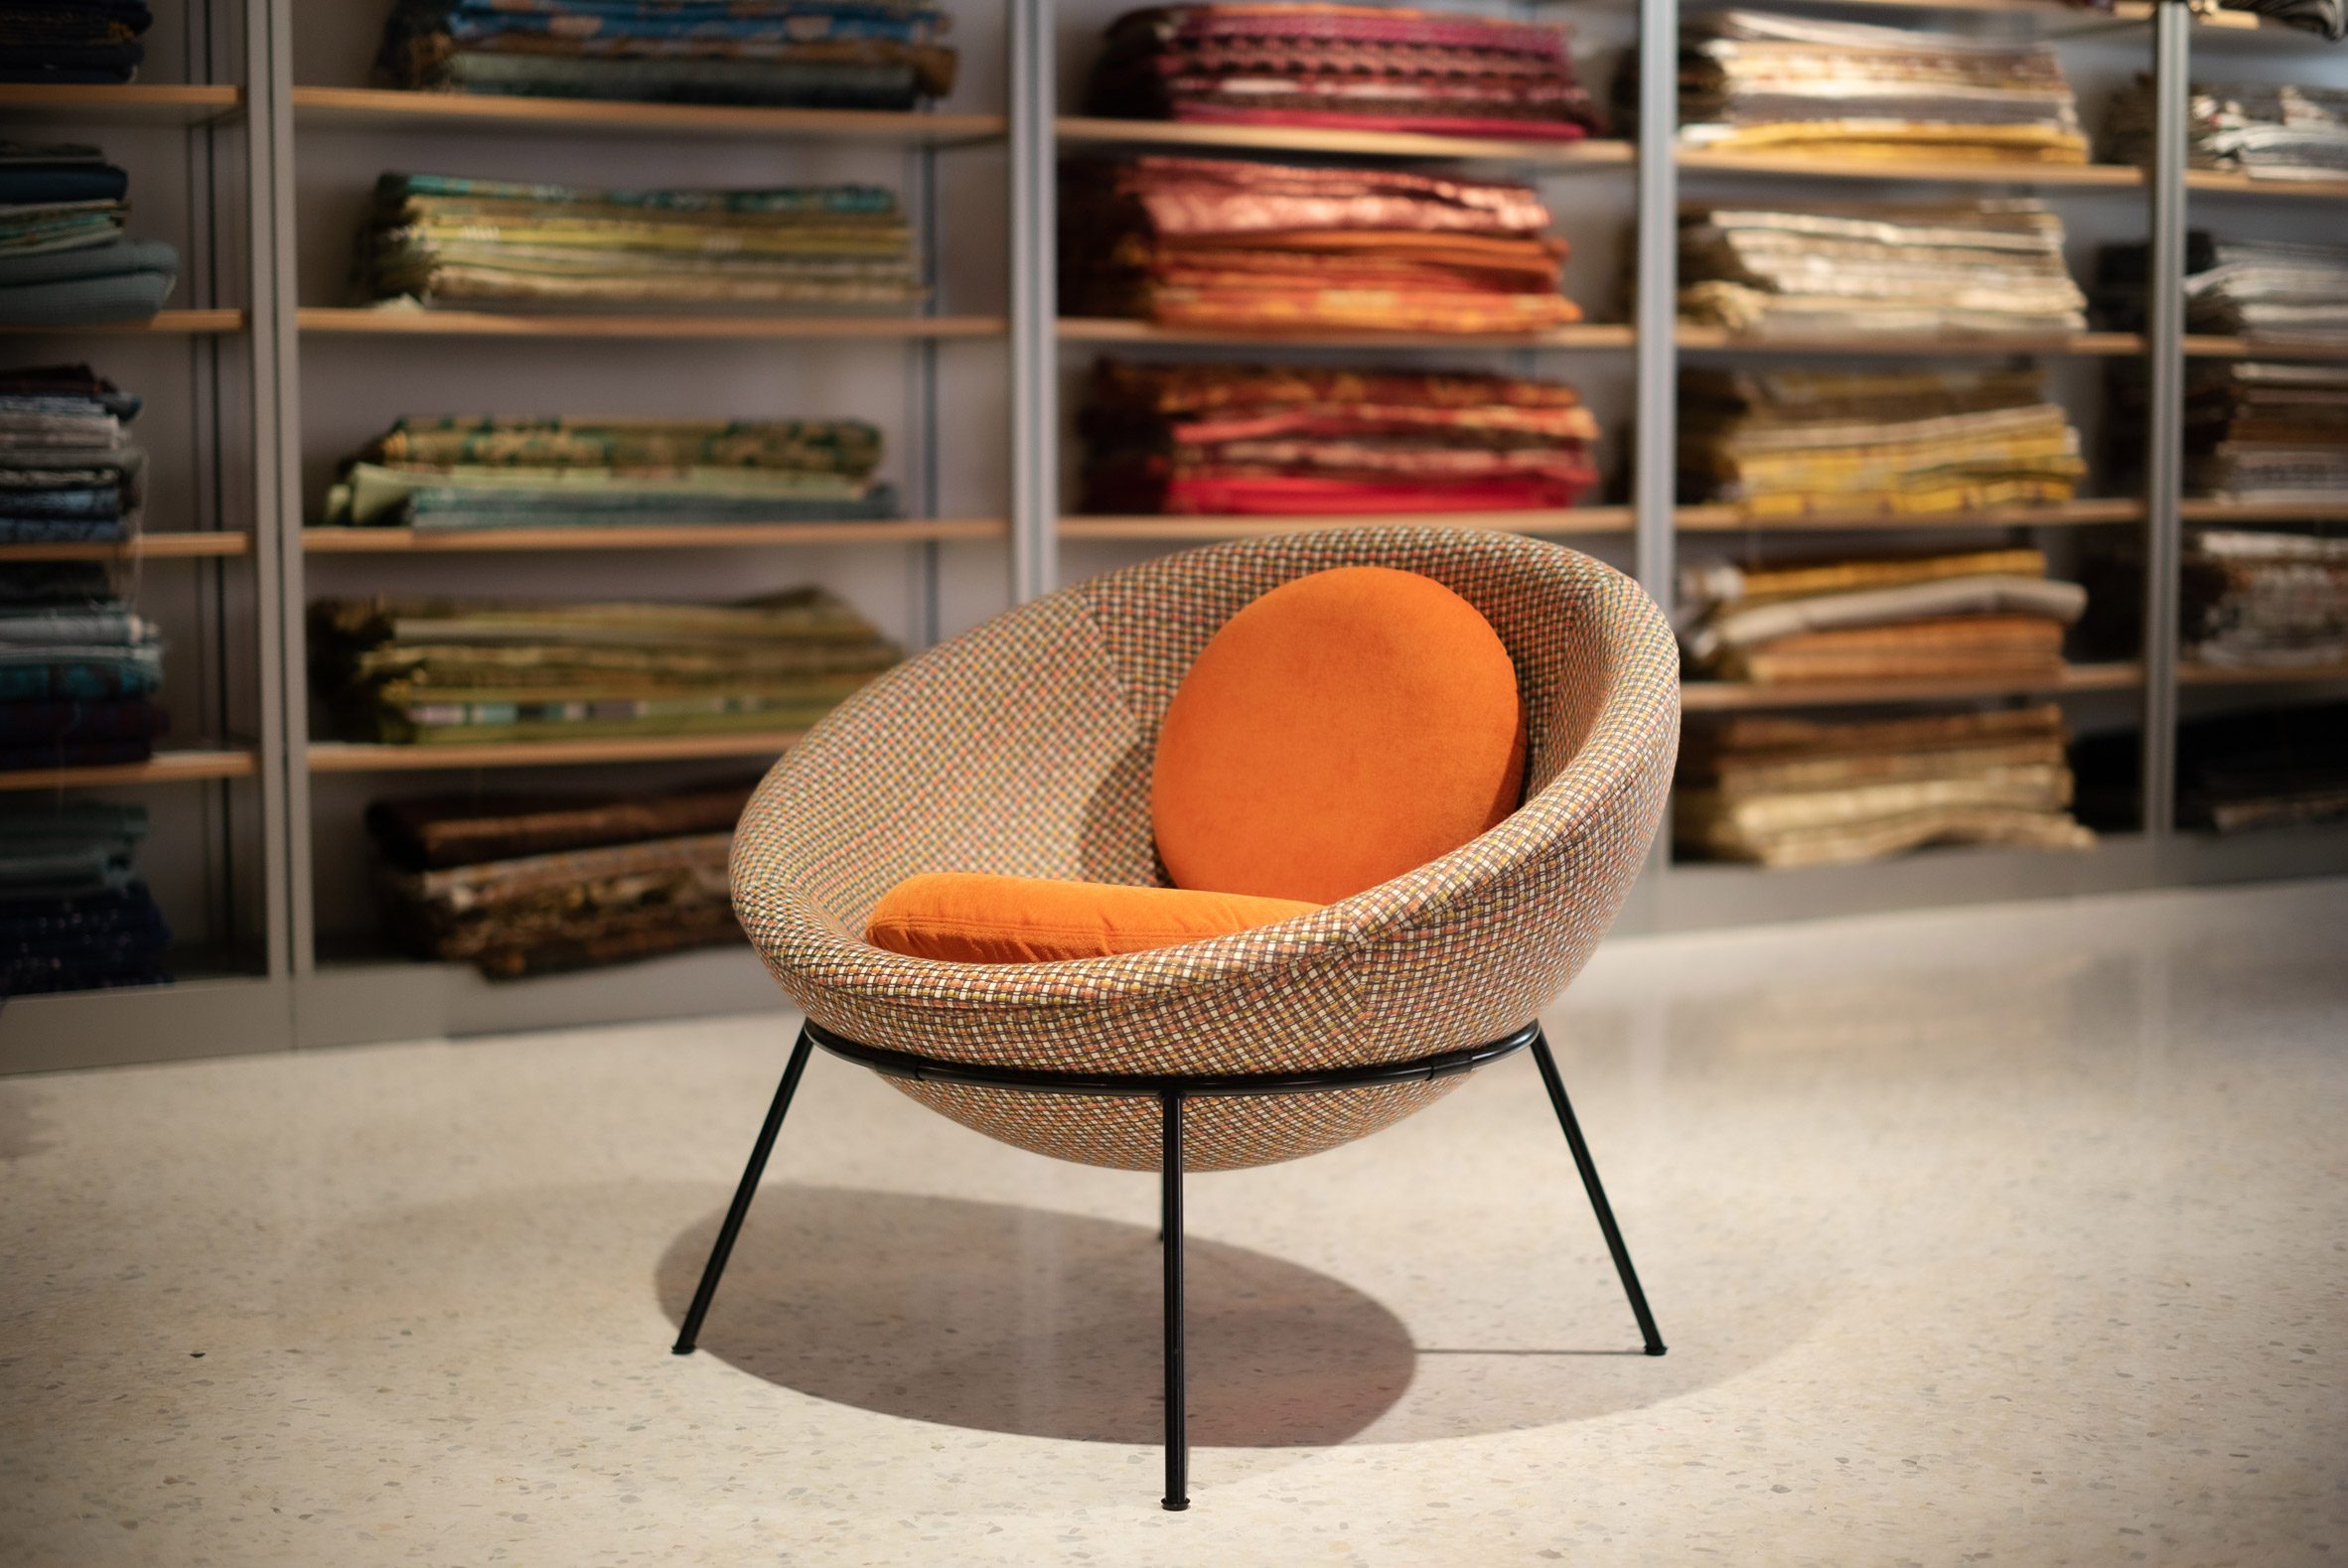 A photograph of Bardi's Bowl Chair by Lina Bo Bardi for Arper in Eureka